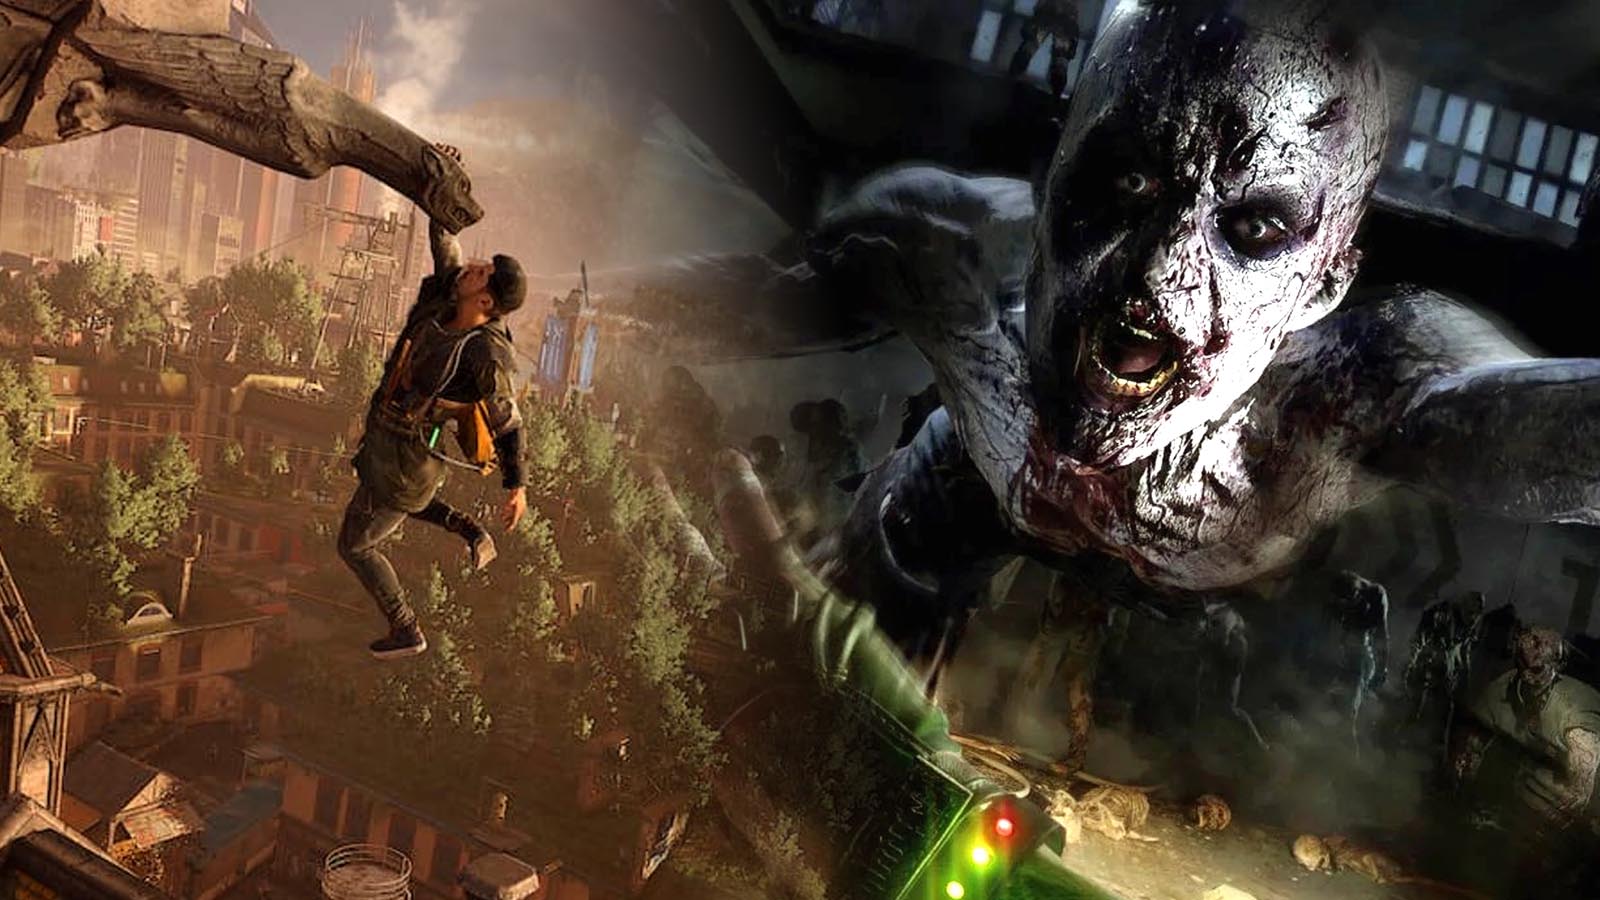 Dying Light 2: Metacritic Score Revealed